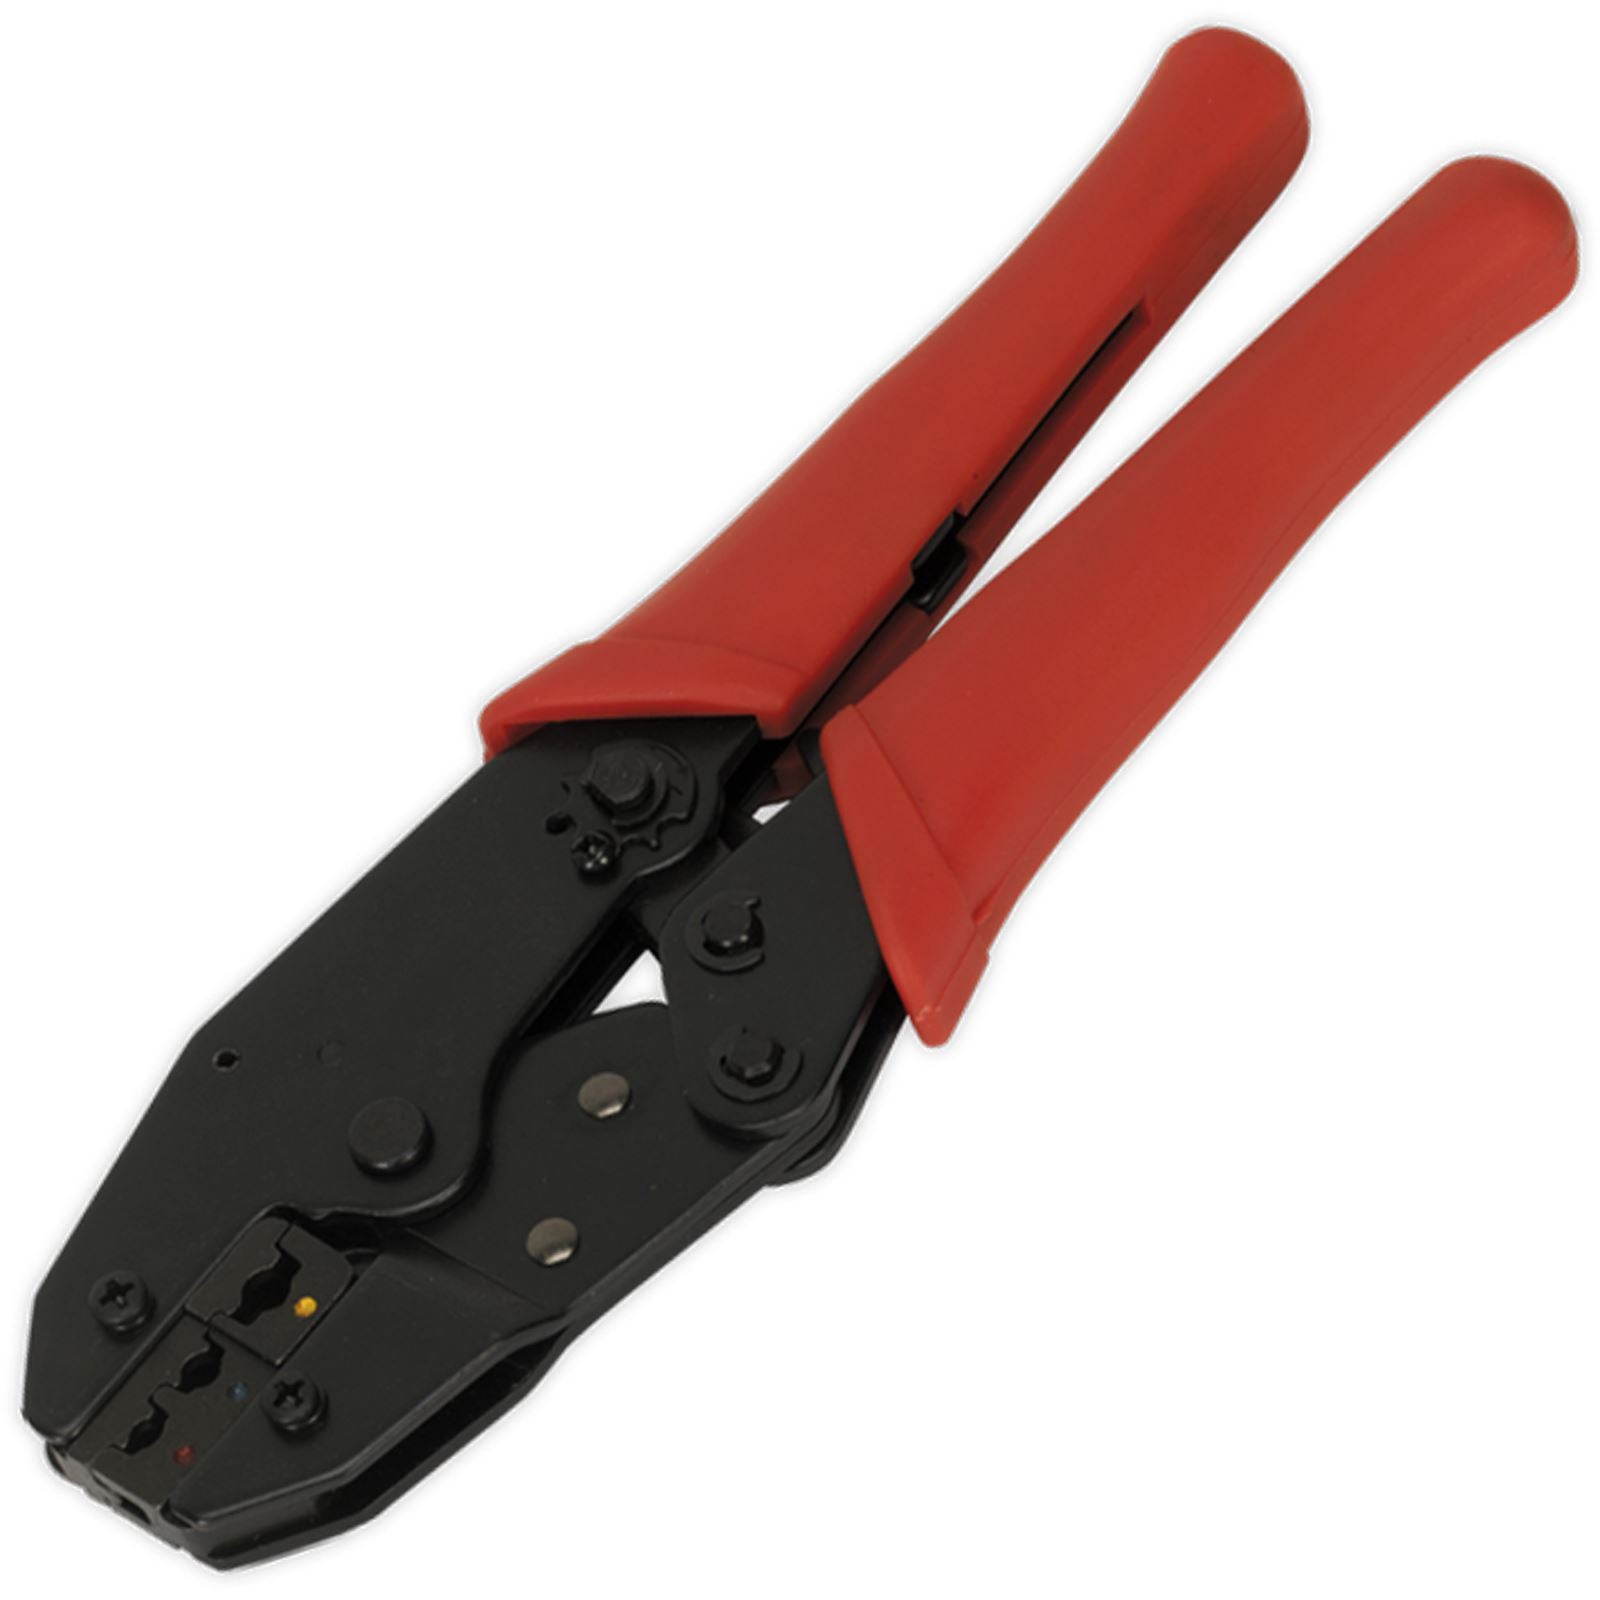 Siegen Ratchet Crimping Pliers for Insulated Terminals Electricans Crimpers